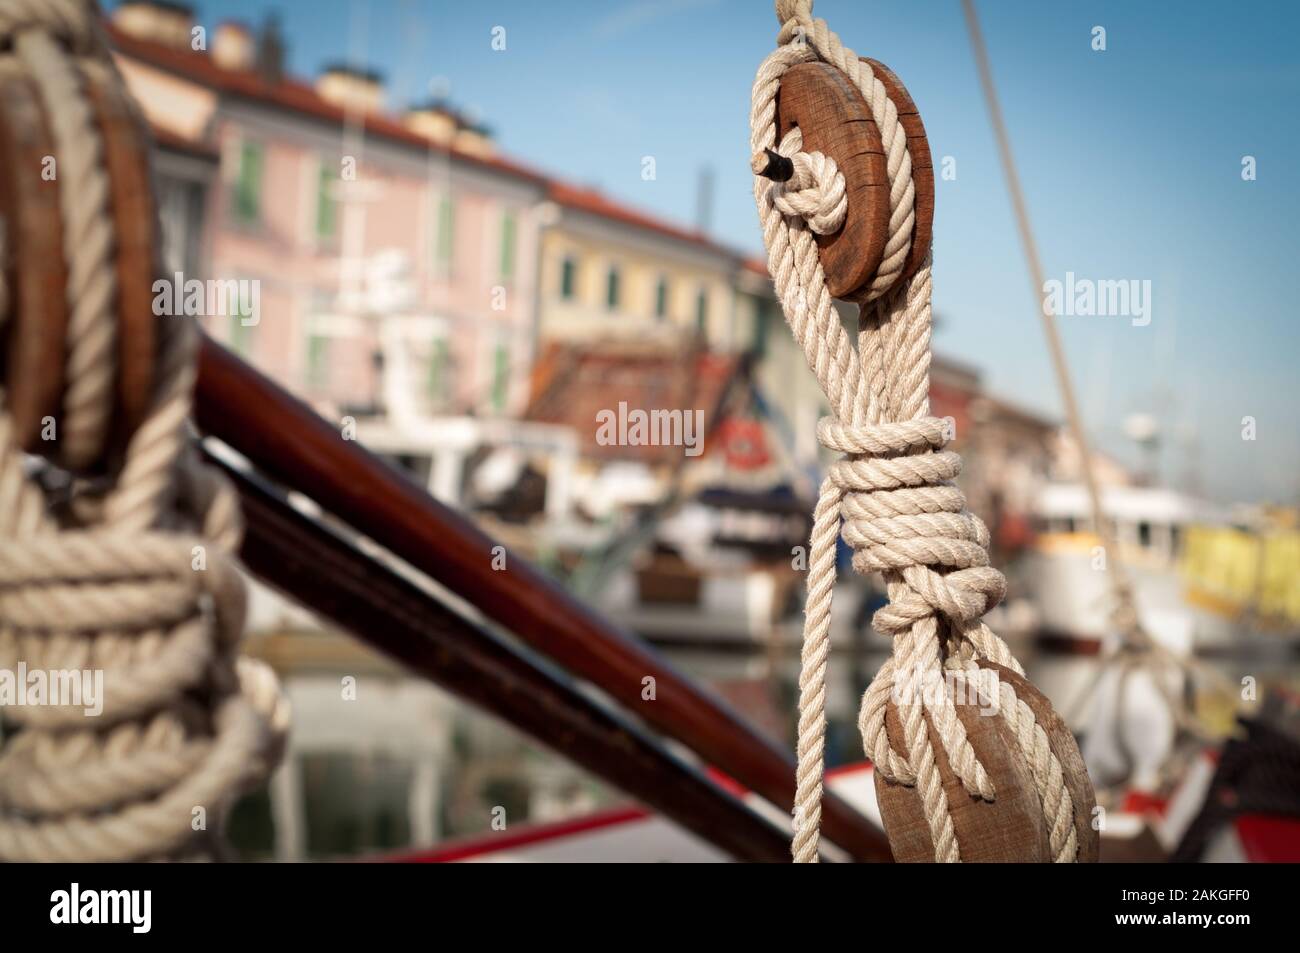 close up view of a old vintage pulley system with rigging ropes on a sailboat in Cesenatico, Italy Stock Photo